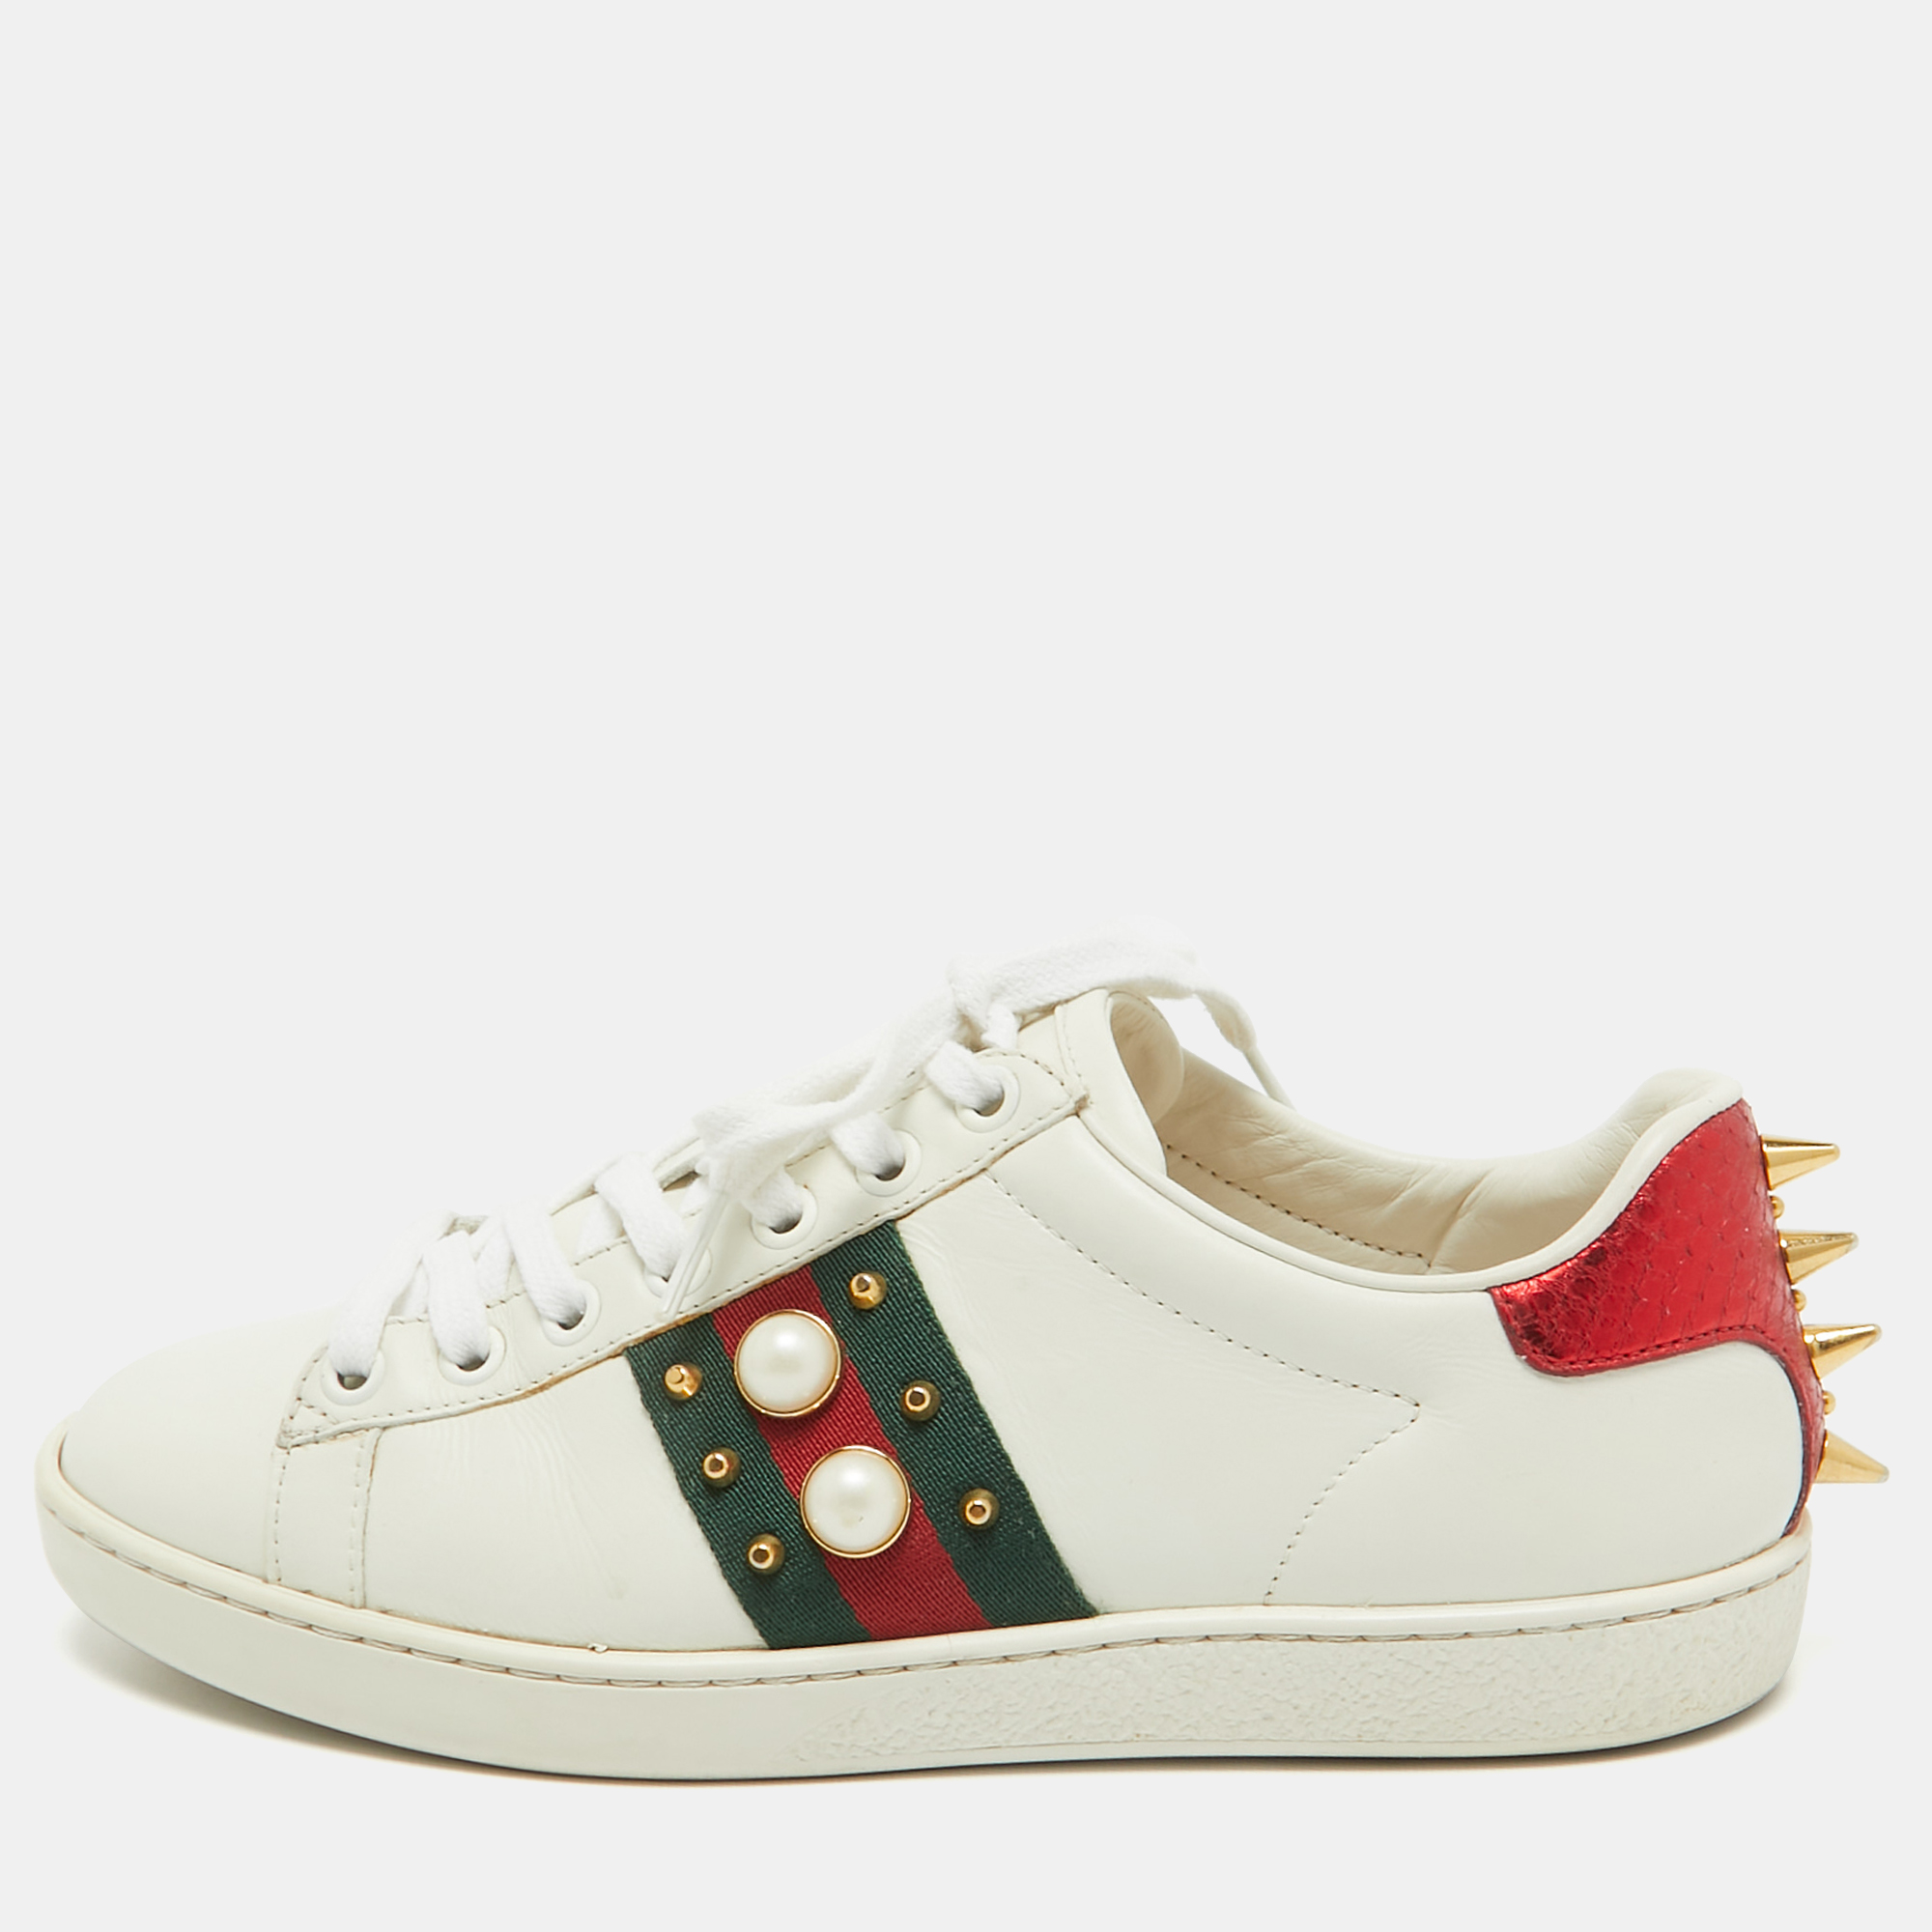 Pre-owned Gucci White Leather Faux Pearl Embellished Ace Lace Up Sneakers Size 35